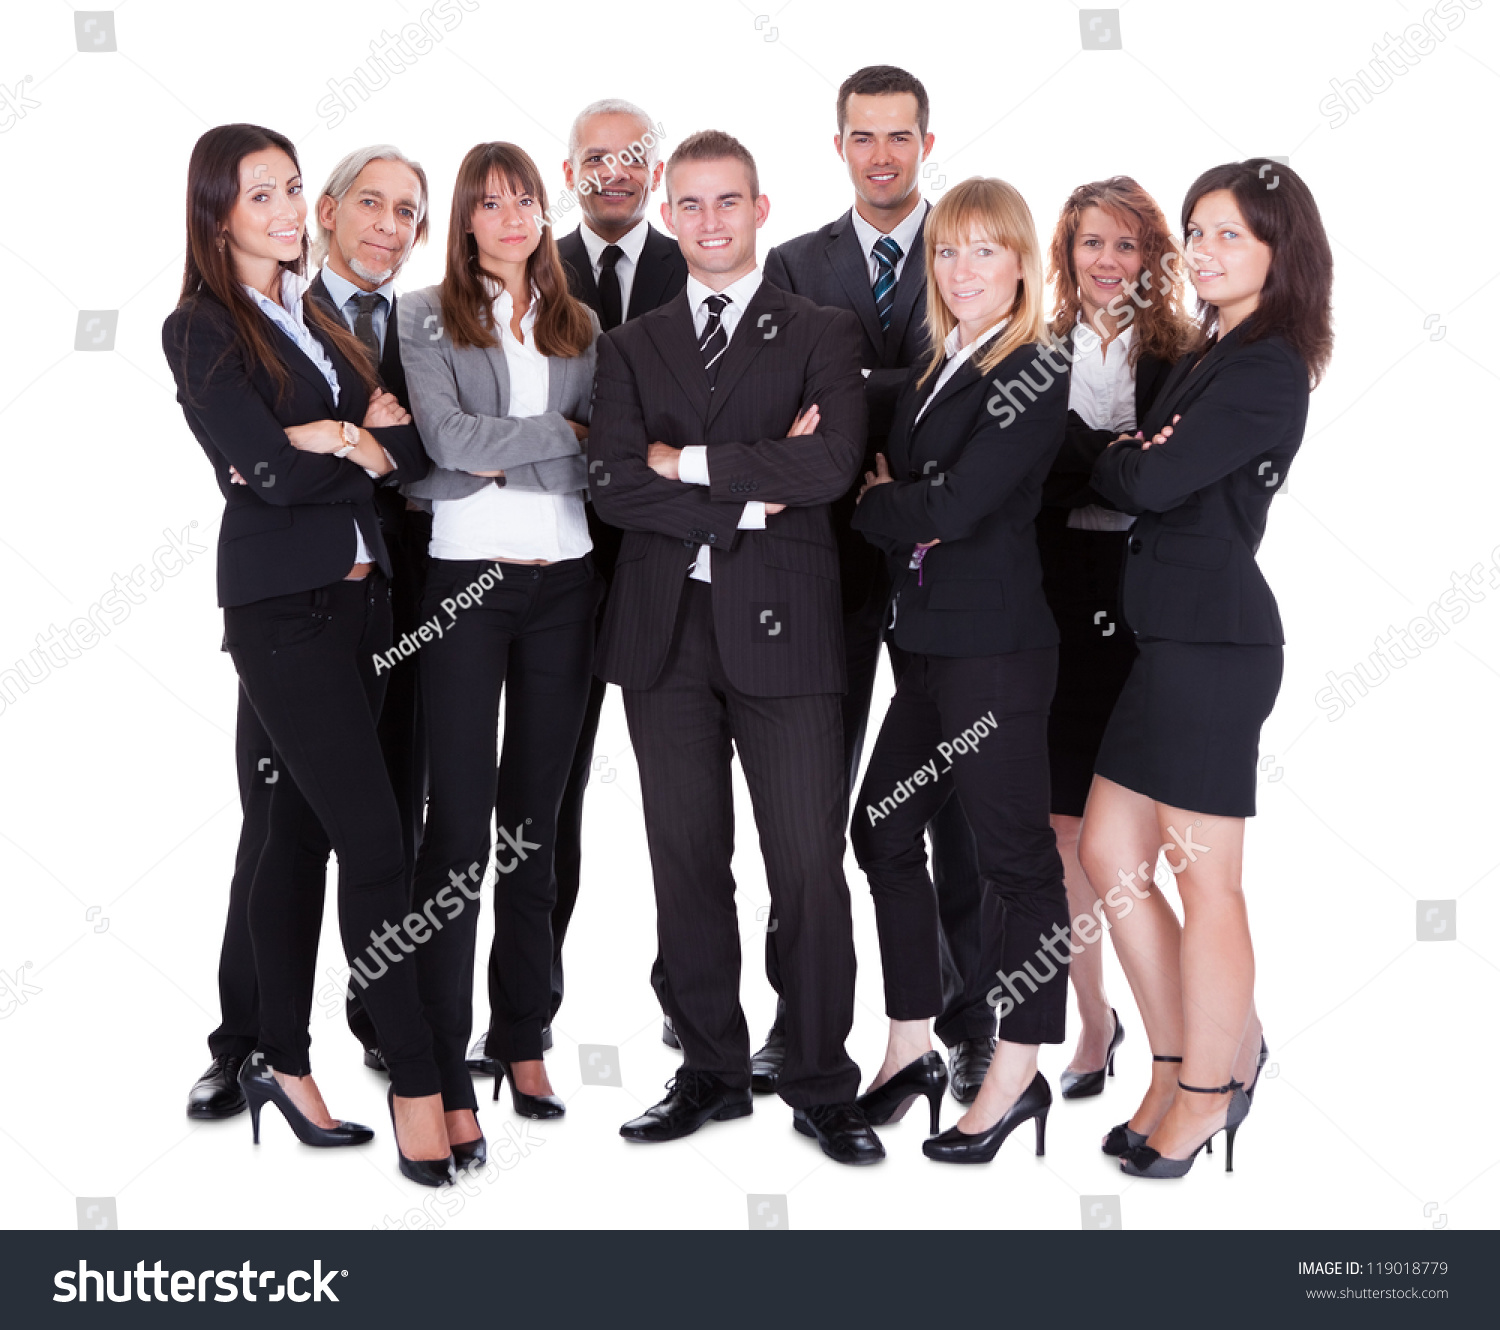 Lineup of diverse professional business executives or partners standing relaxed in a row isolated on white #119018779